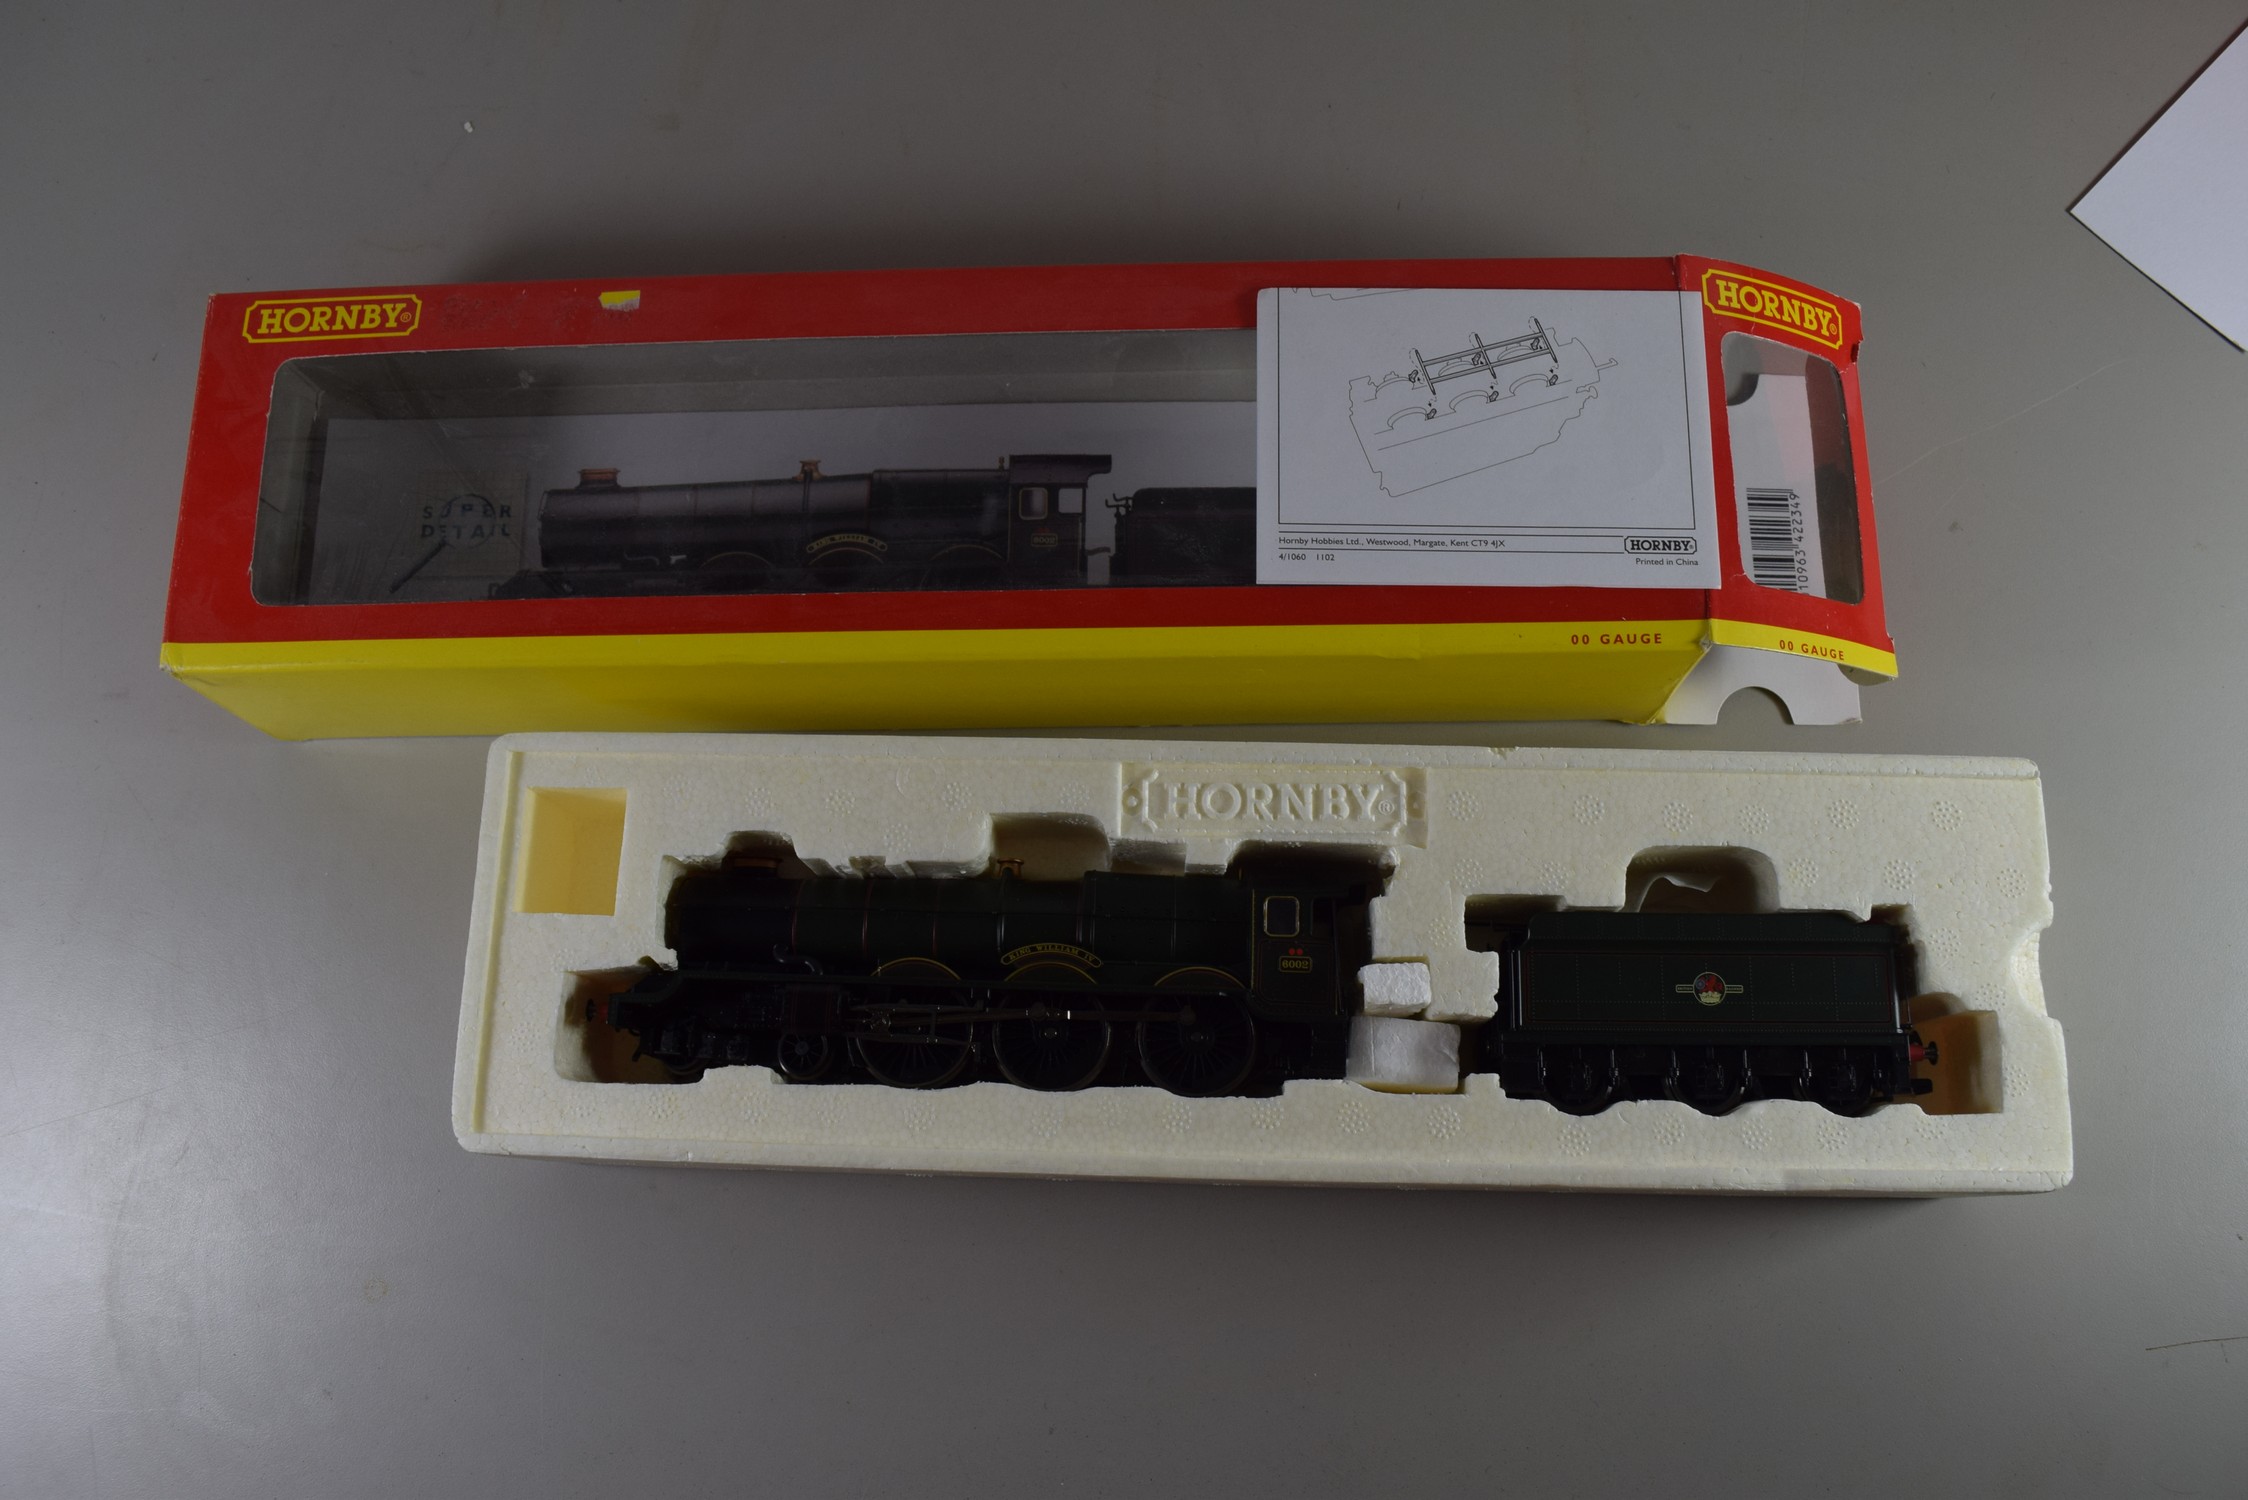 Boxed Hornby 00 gauge R2234 BR 4-6-0 King class "King William VI" No 6002